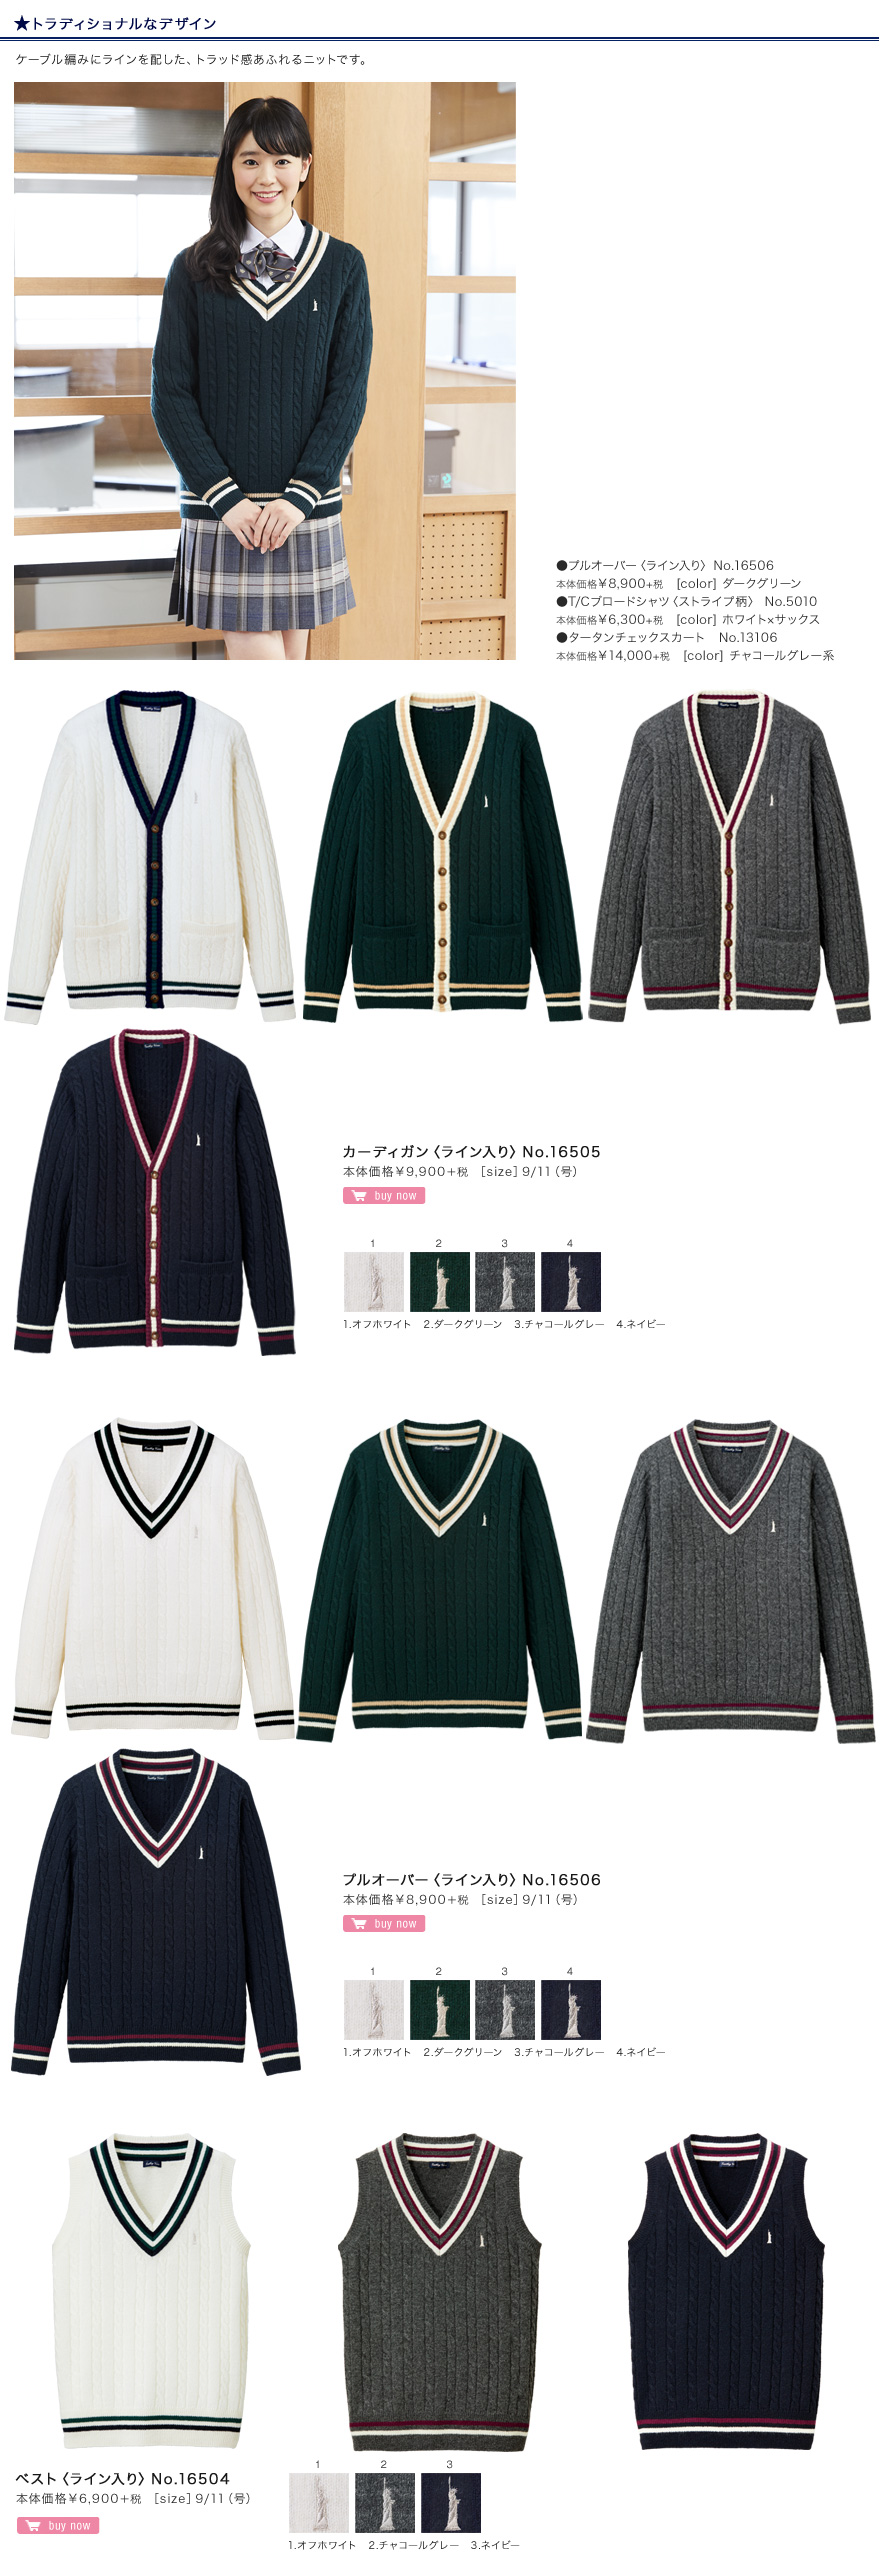 Knit 季節のスクールアイテム Eastboy Official Web Site